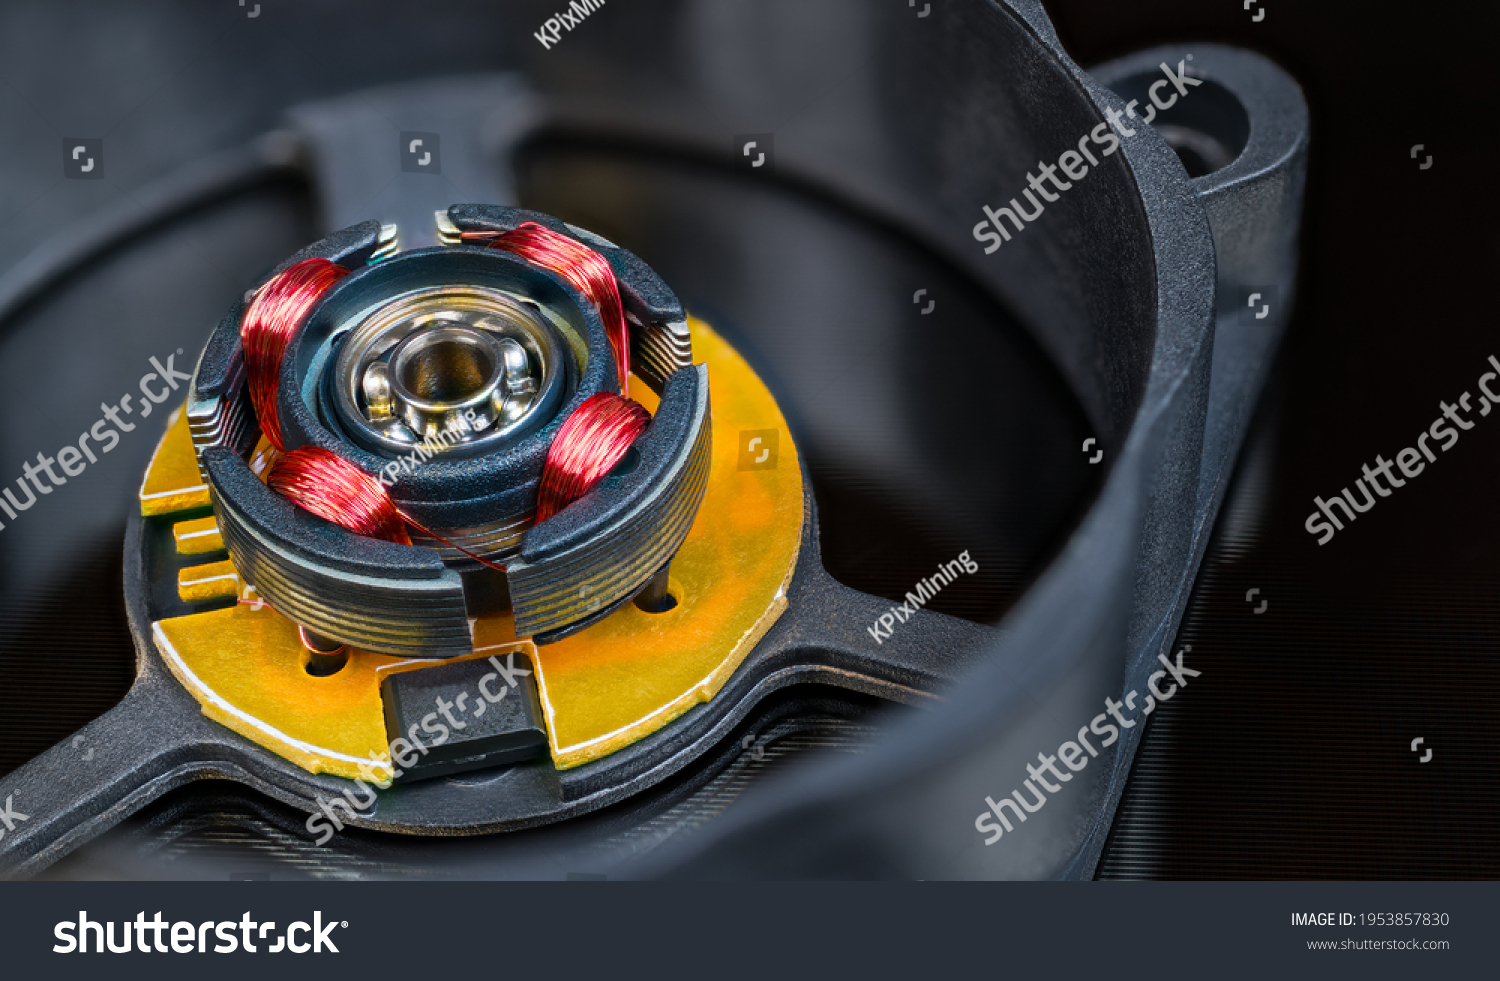 Electric motor rotor with permanent magnet, copper wire inductors and metal ball bearing. Close-up of disassembled computer fan with integrated Hall-effect sensor. Detail of open black plastic cooler. #1953857830